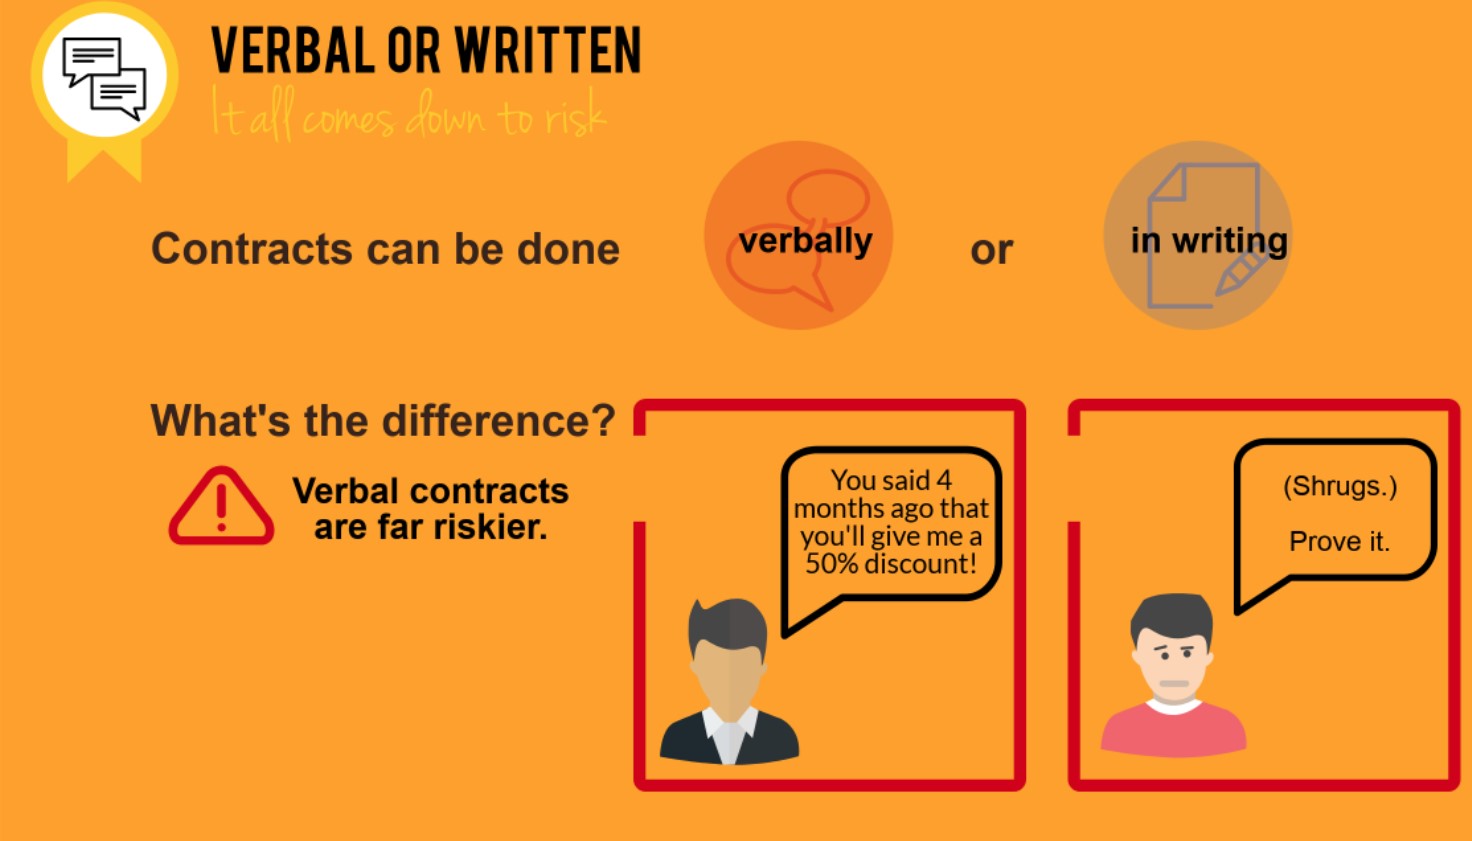 Verbal contracts are riskier than written contracts